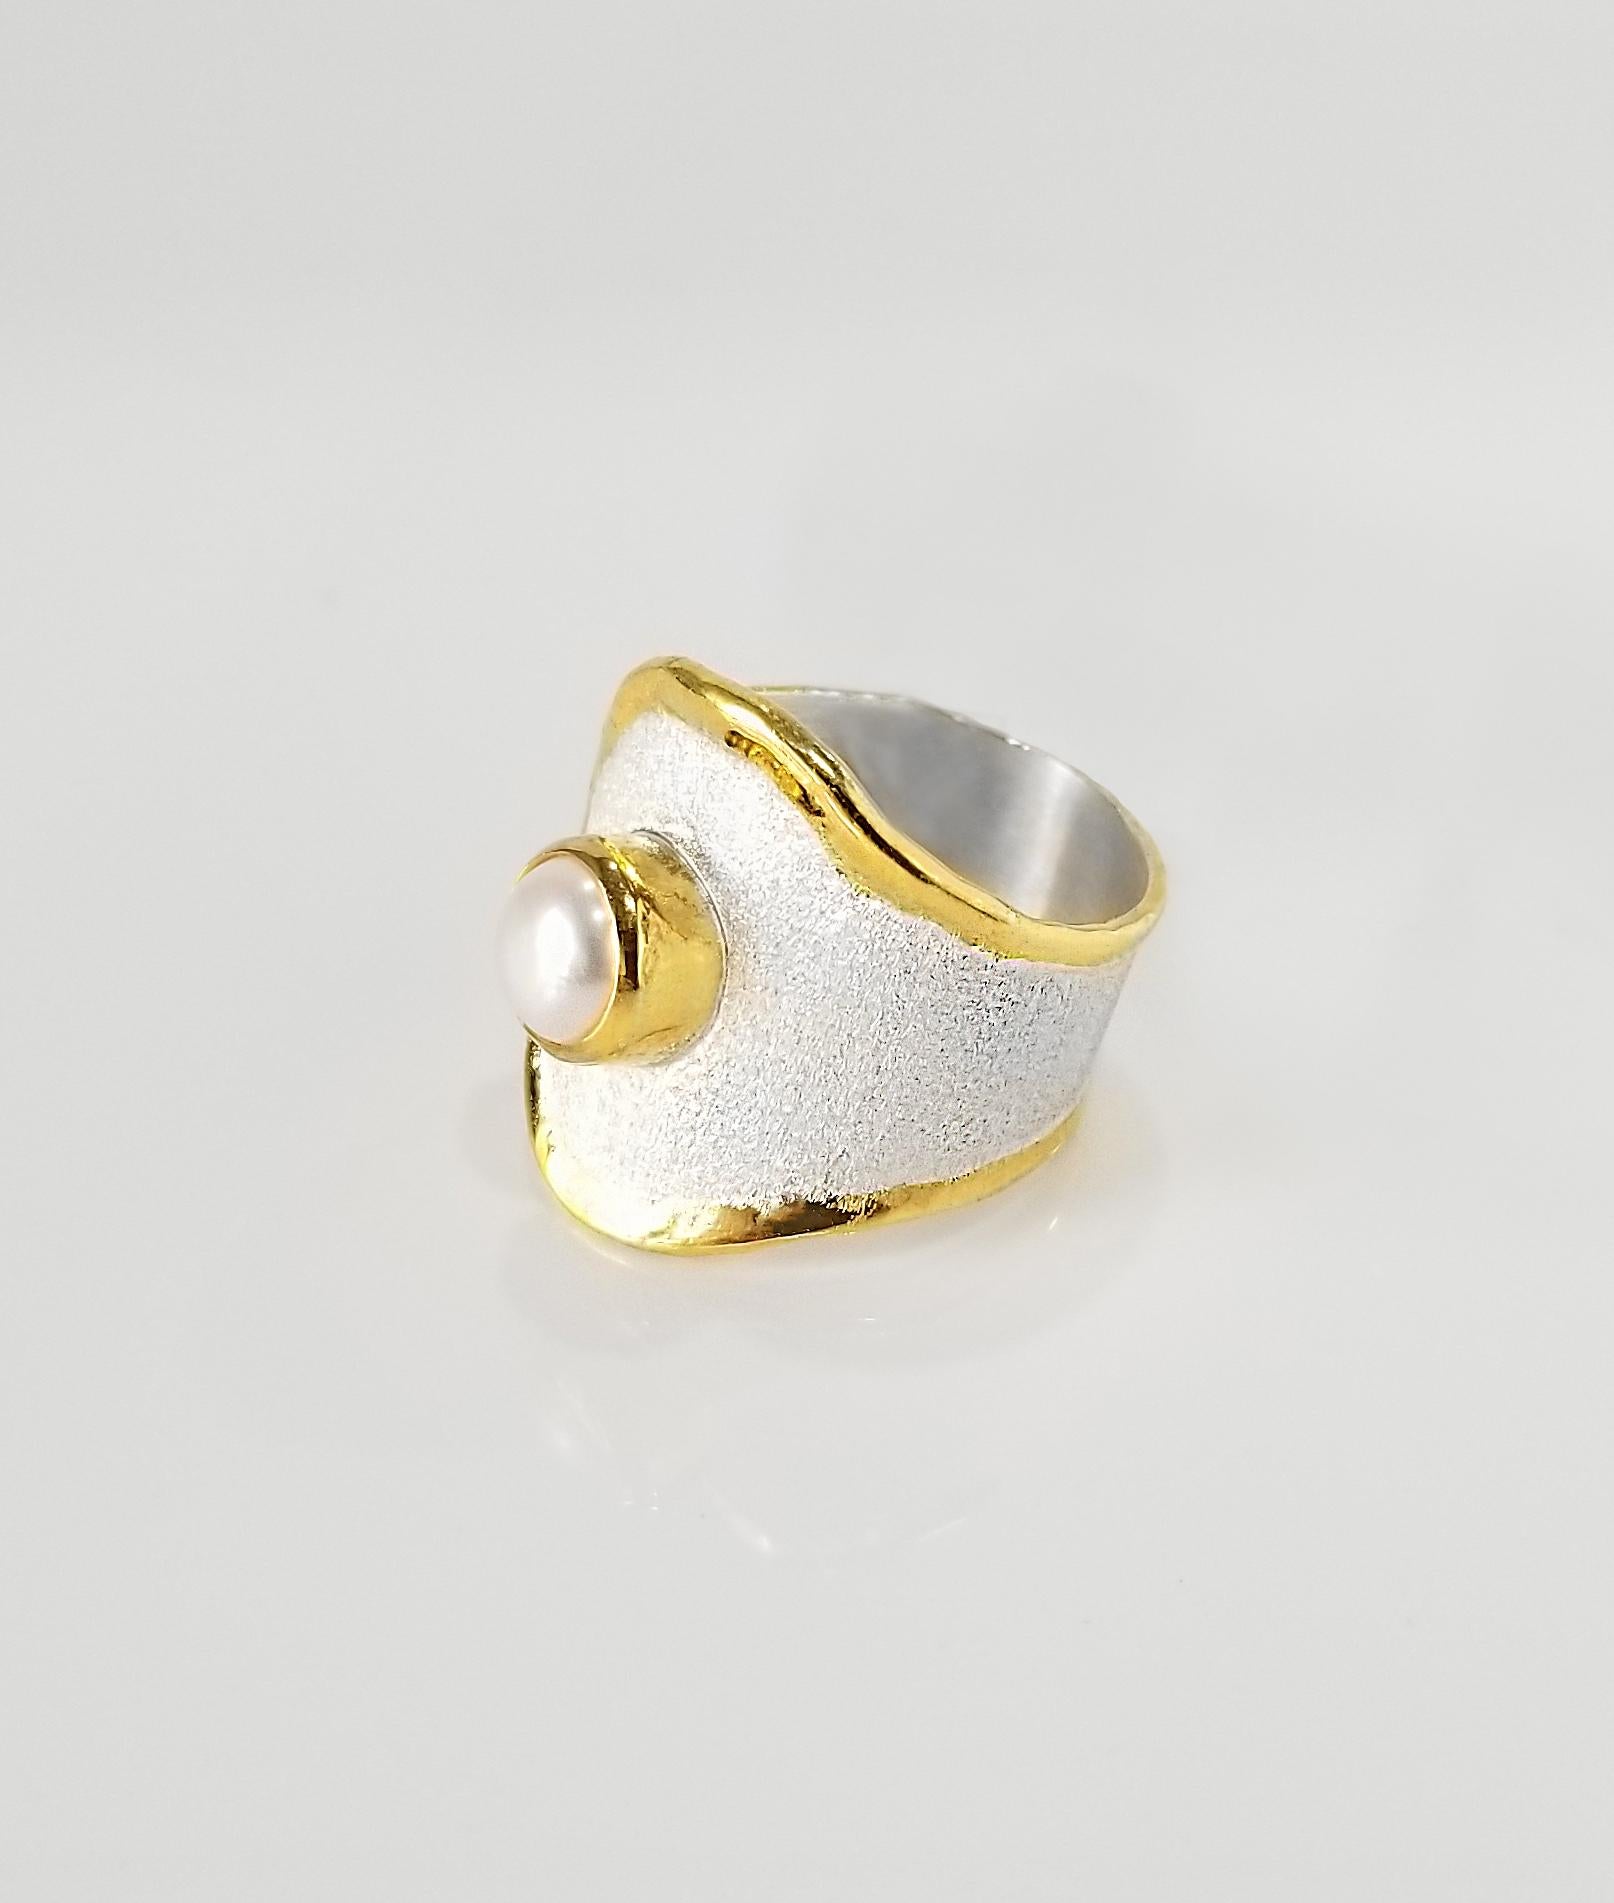 Yianni Creations Midas Collection 100% Handmade Artisan Ring from Fine Silver with a layover of 24 Karat Yellow Gold features 7.5mm Pearl complemented by unique techniques of craftsmanship - brushed texture and nature-inspired liquid edges. The core